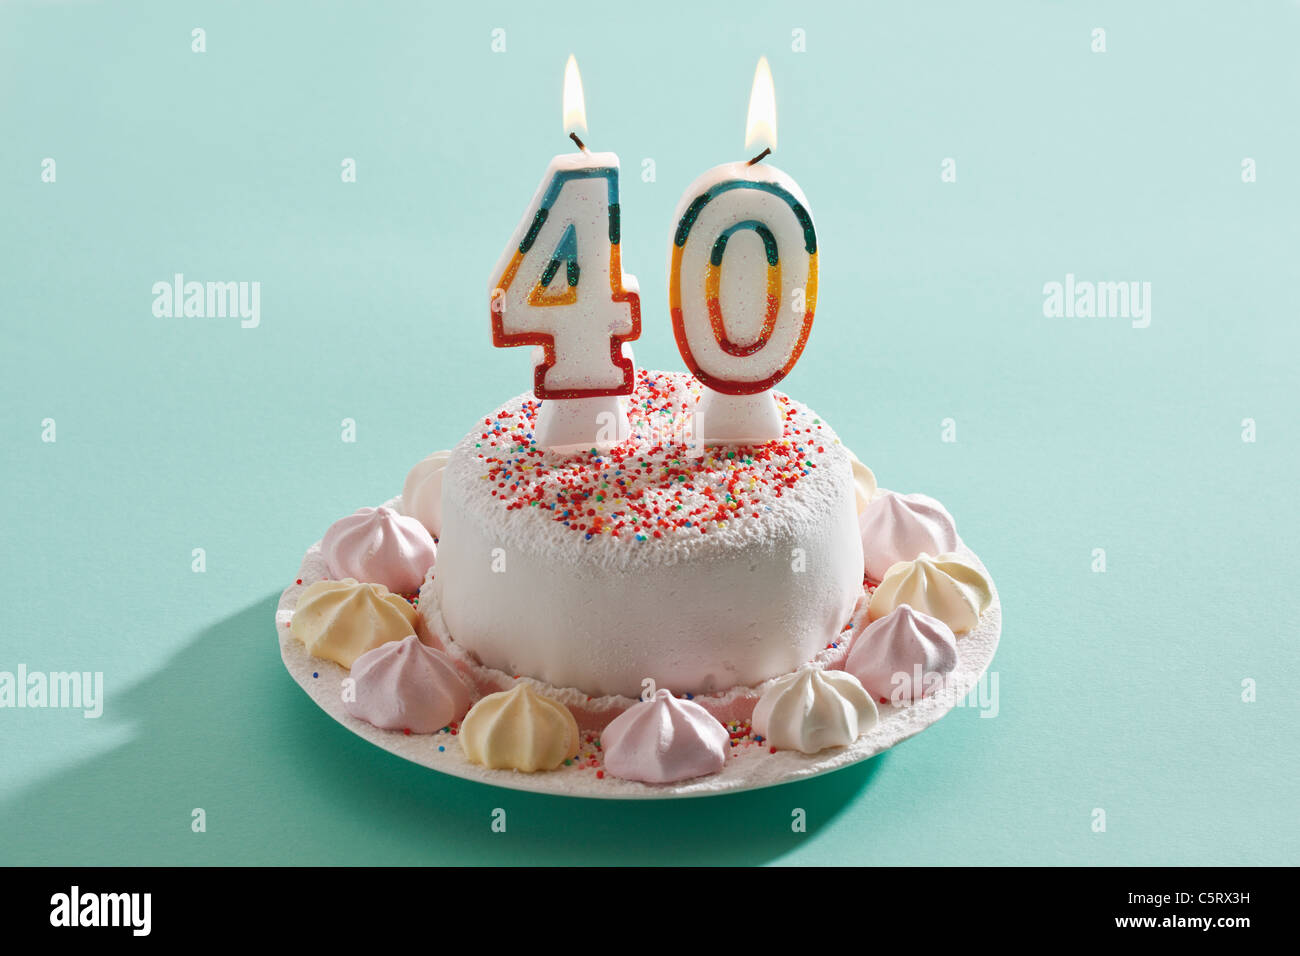 Candle on the 40th birthday cake, number 